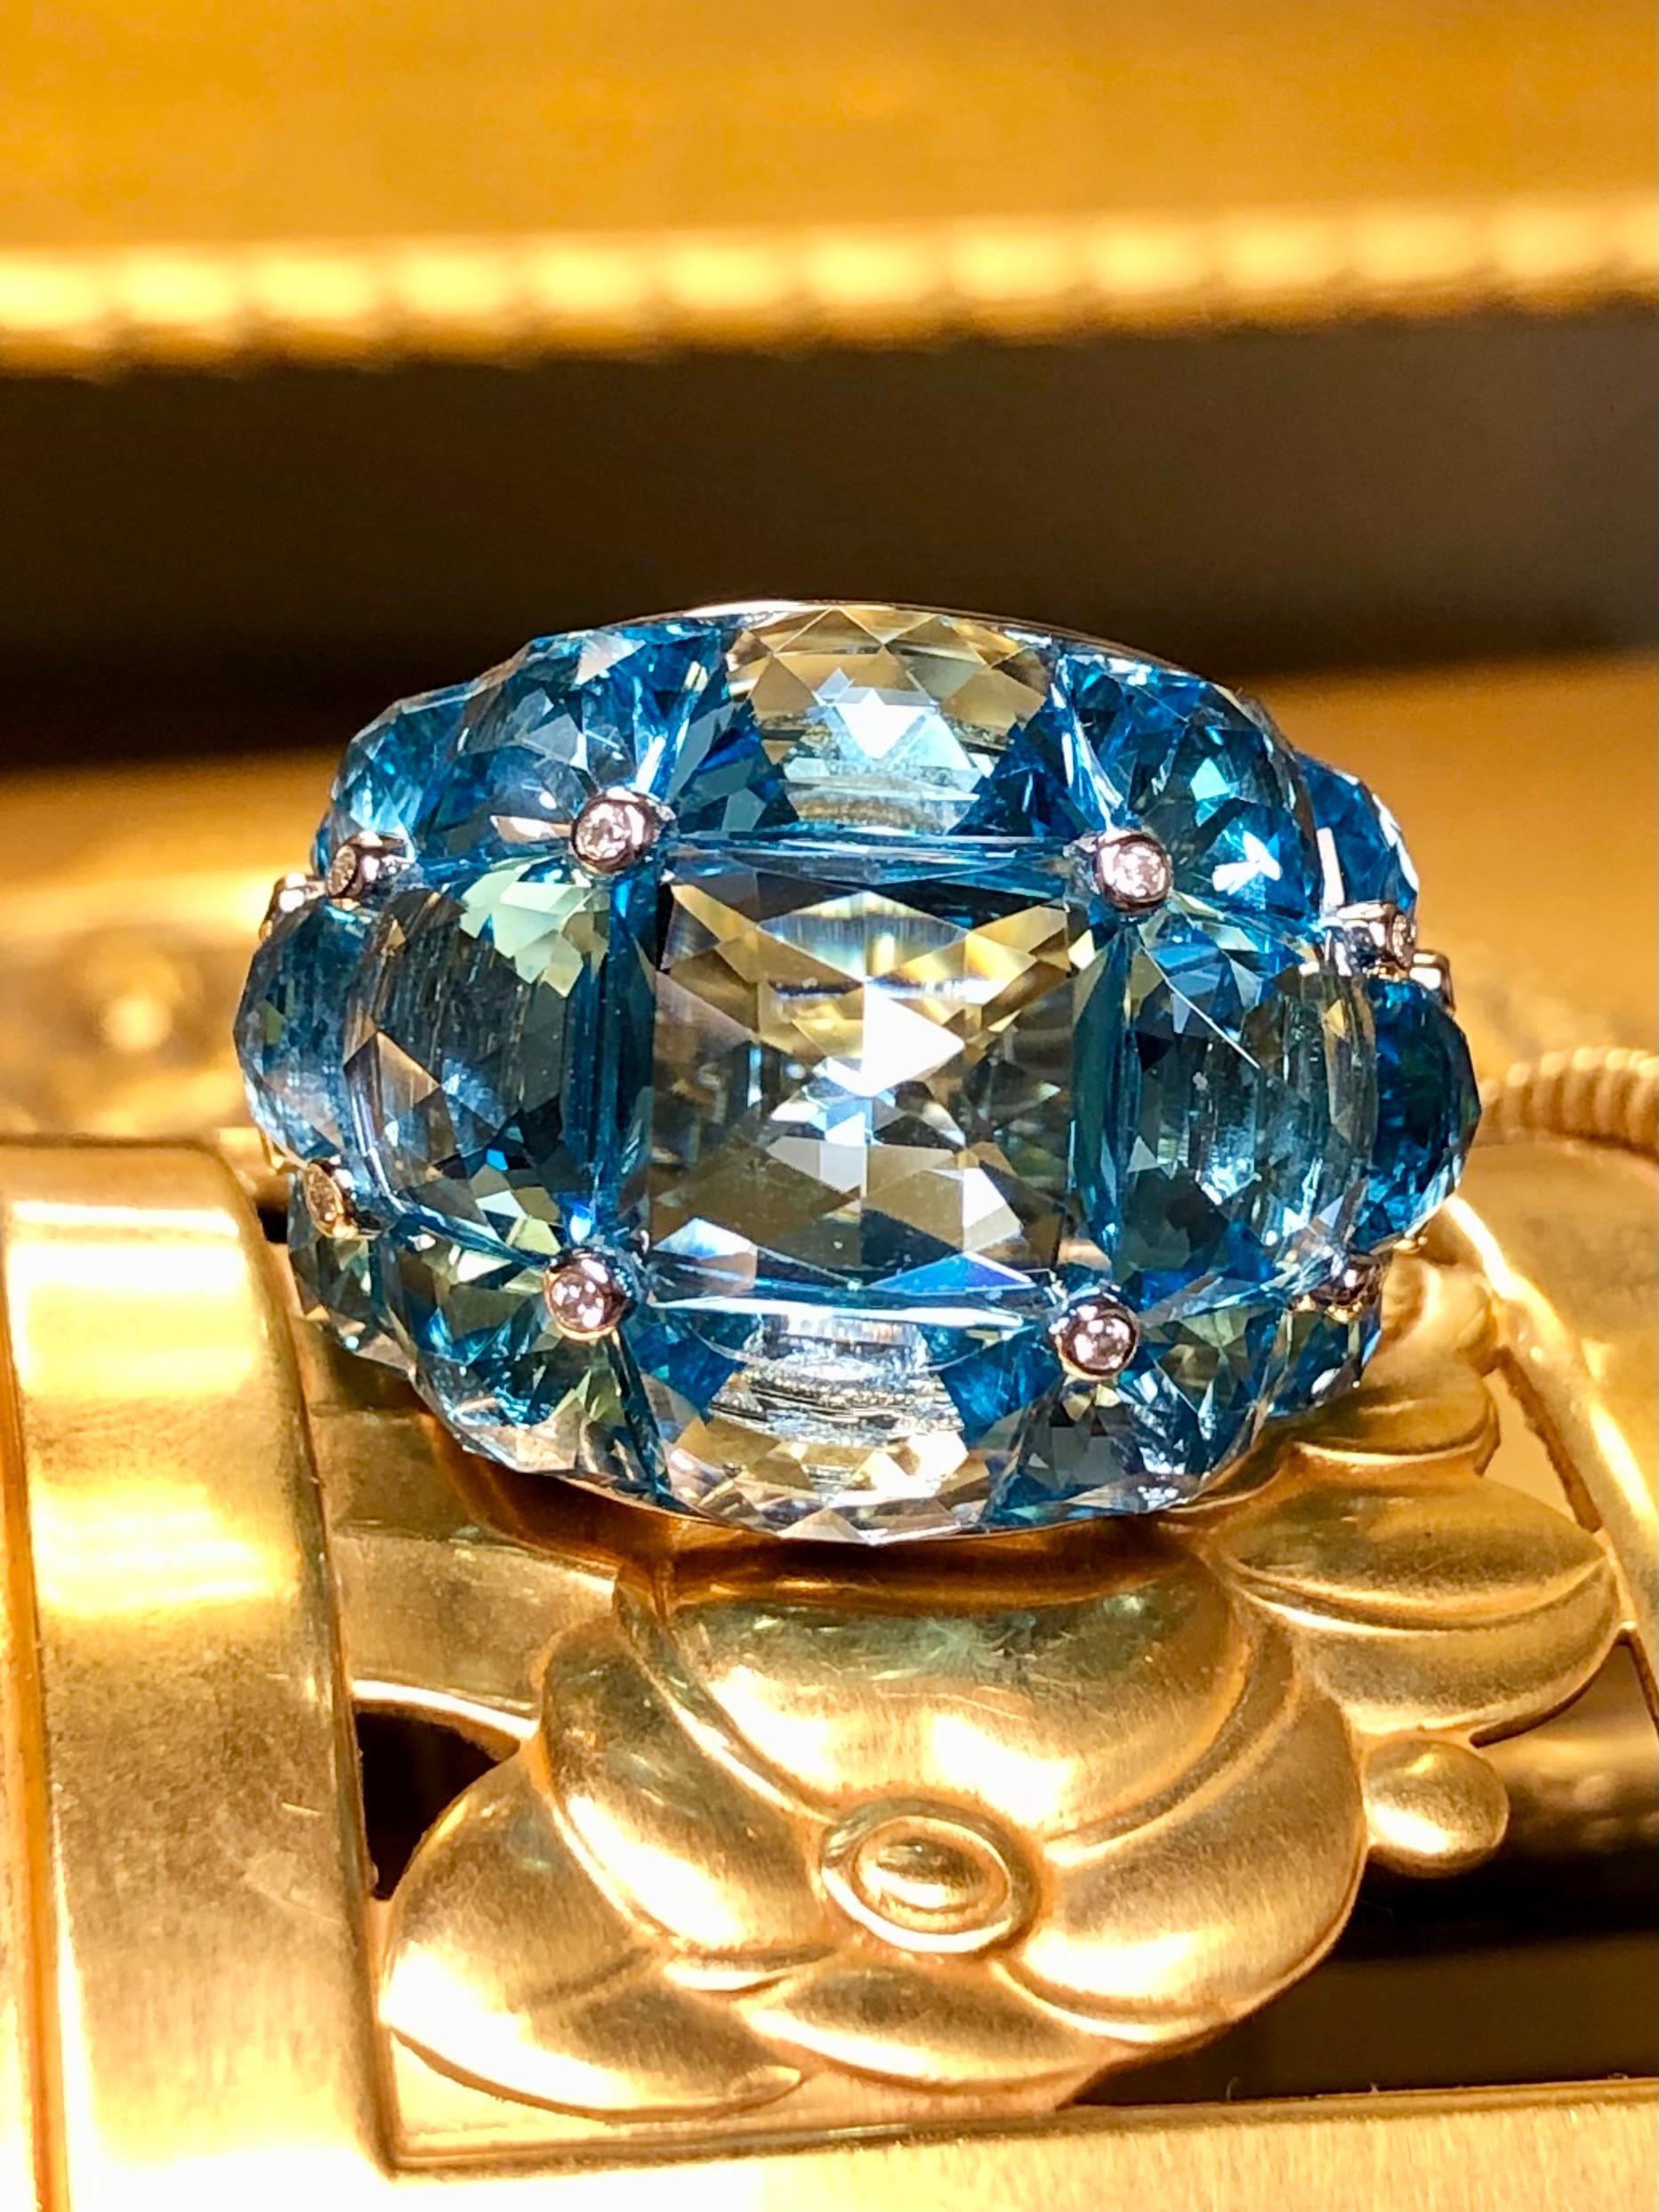 An absolutely spectacular ring hand made in 18K white gold and prong set with custom cut, calibrated natural deep blue topaz with a total approximate weight of 50cttw. Separating the stones are bezel set diamonds being G-H color and Vs1-2 clarity